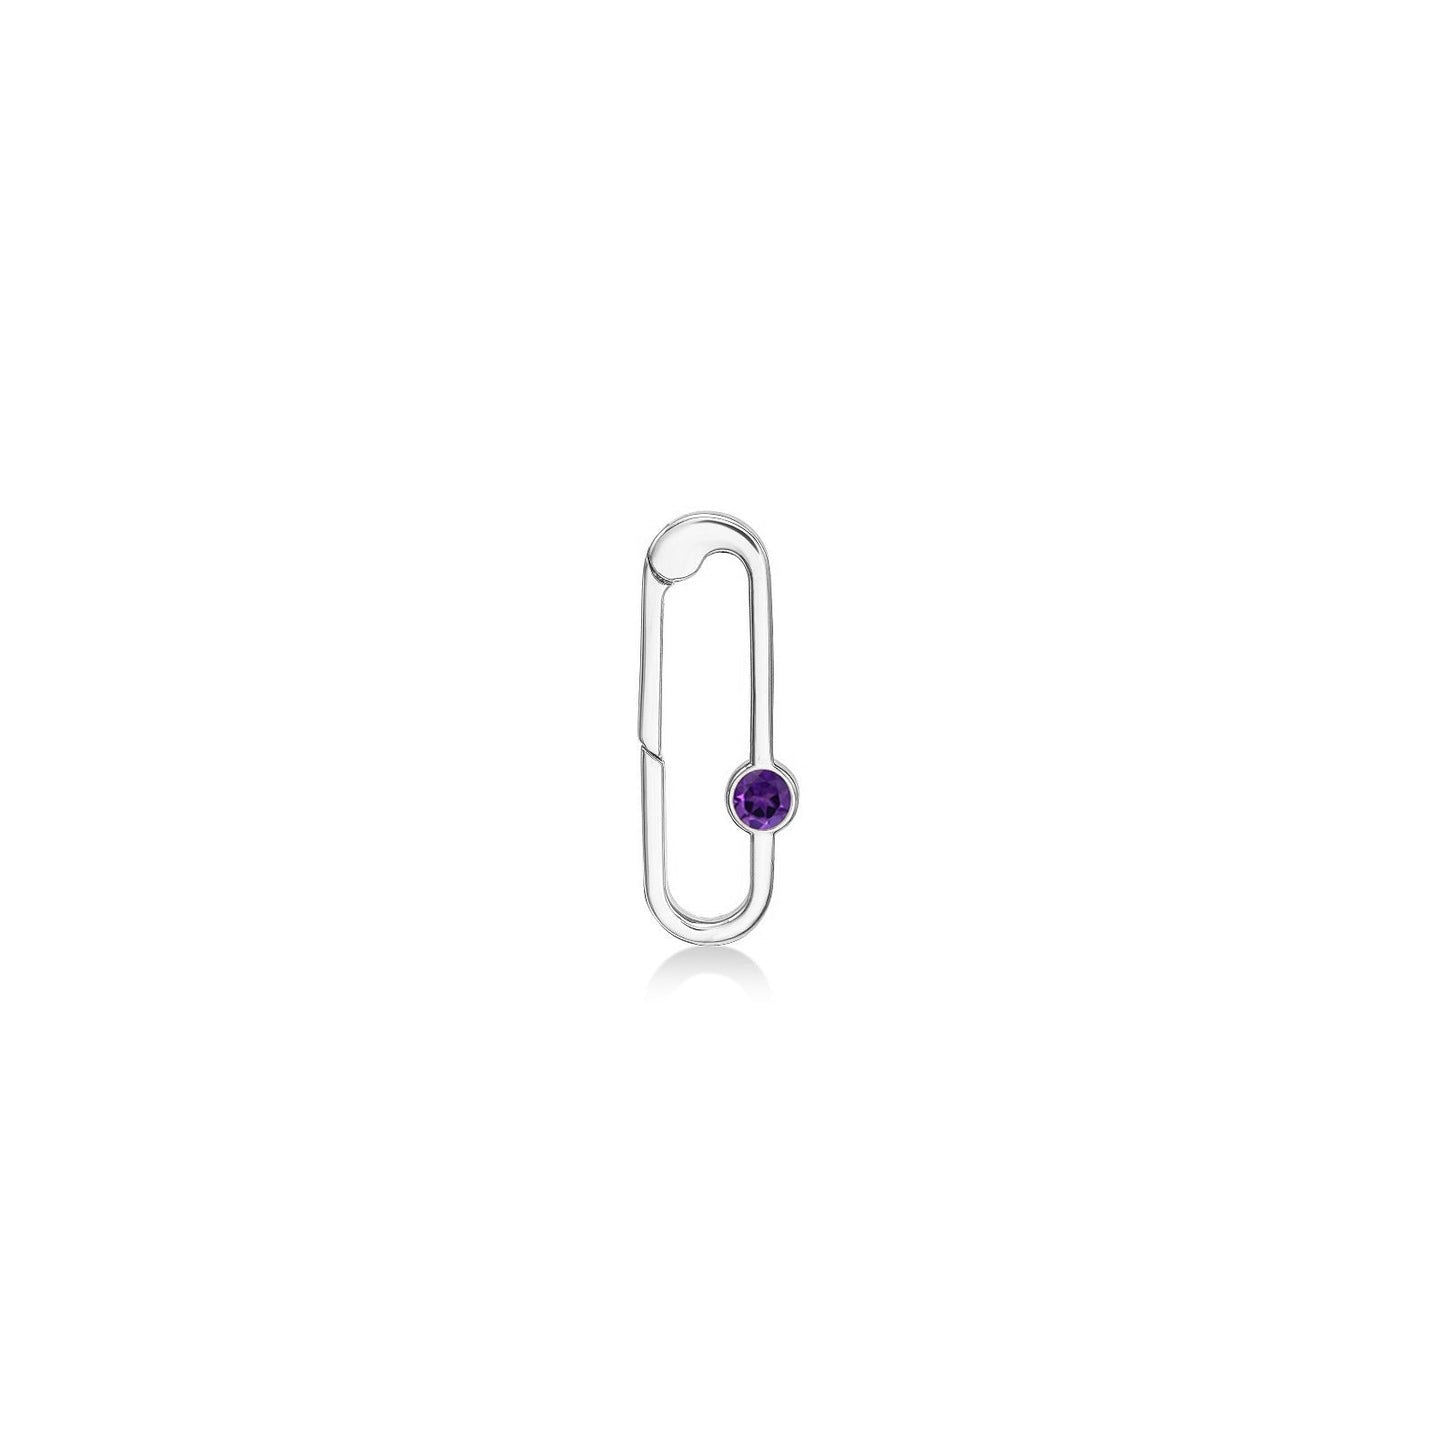 14k white gold paperclip charm lock with amethyst